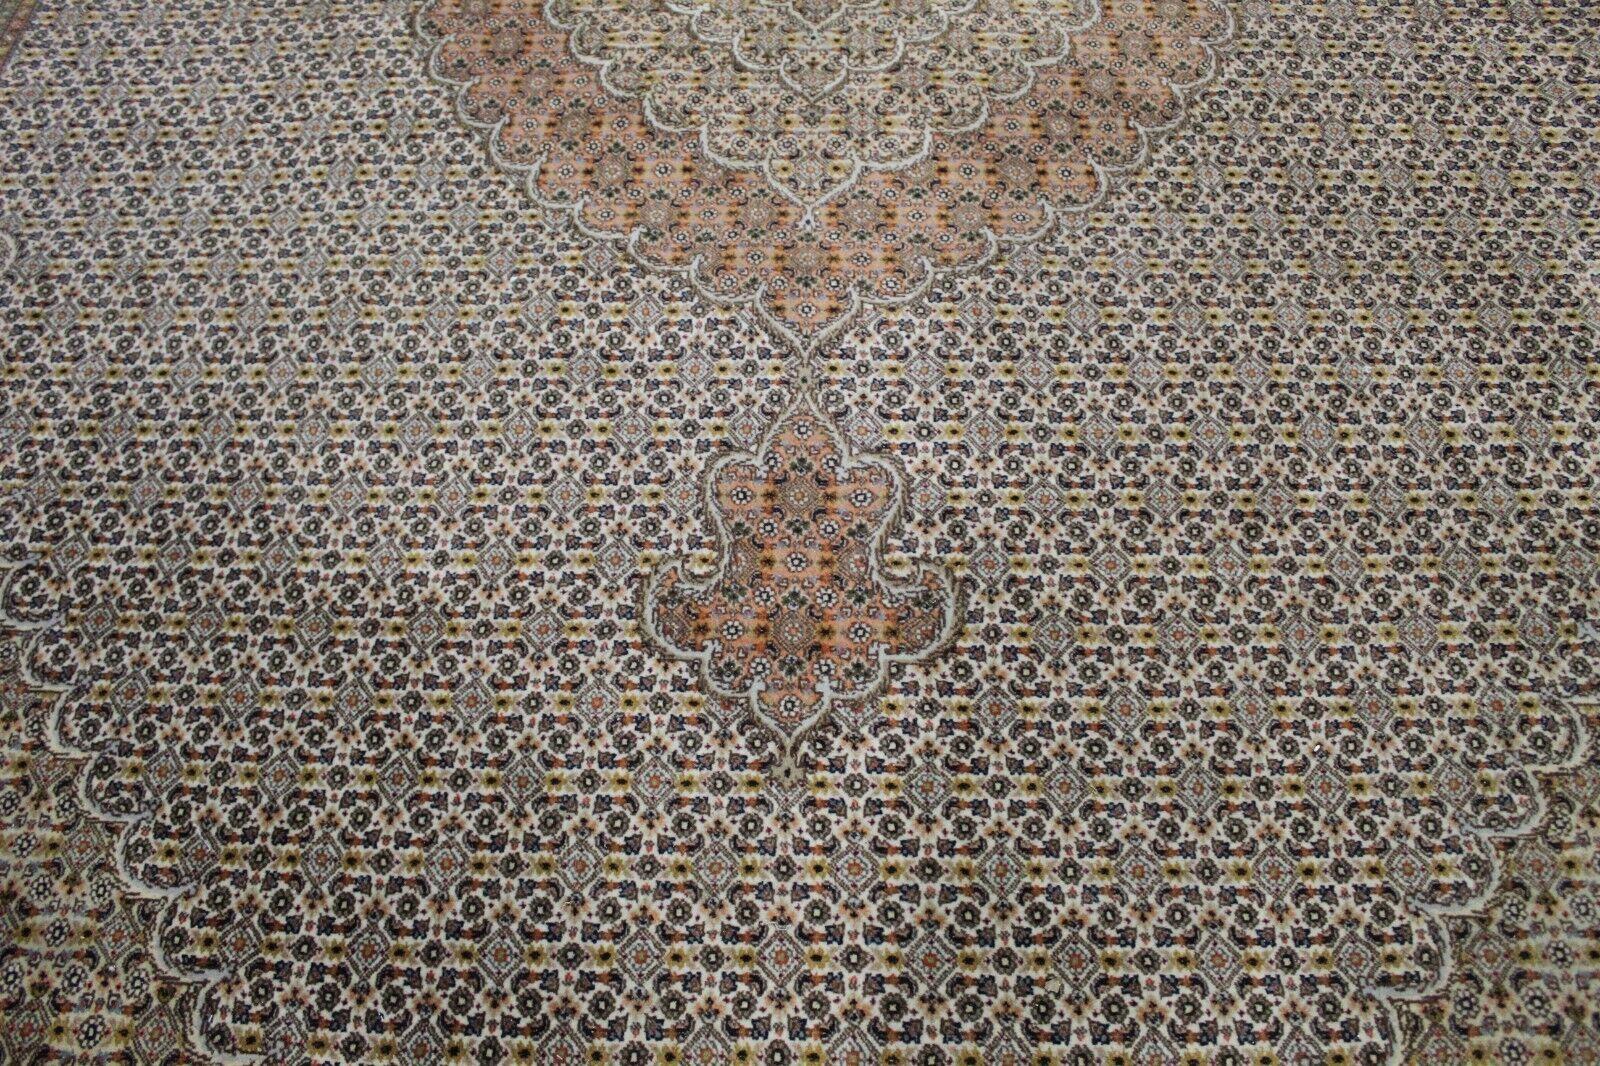 Handmade Vintage Persian Style Tabriz 50 Raj Rug 8.2' x 11.3', 1960s - 1K41 In Good Condition For Sale In Bordeaux, FR